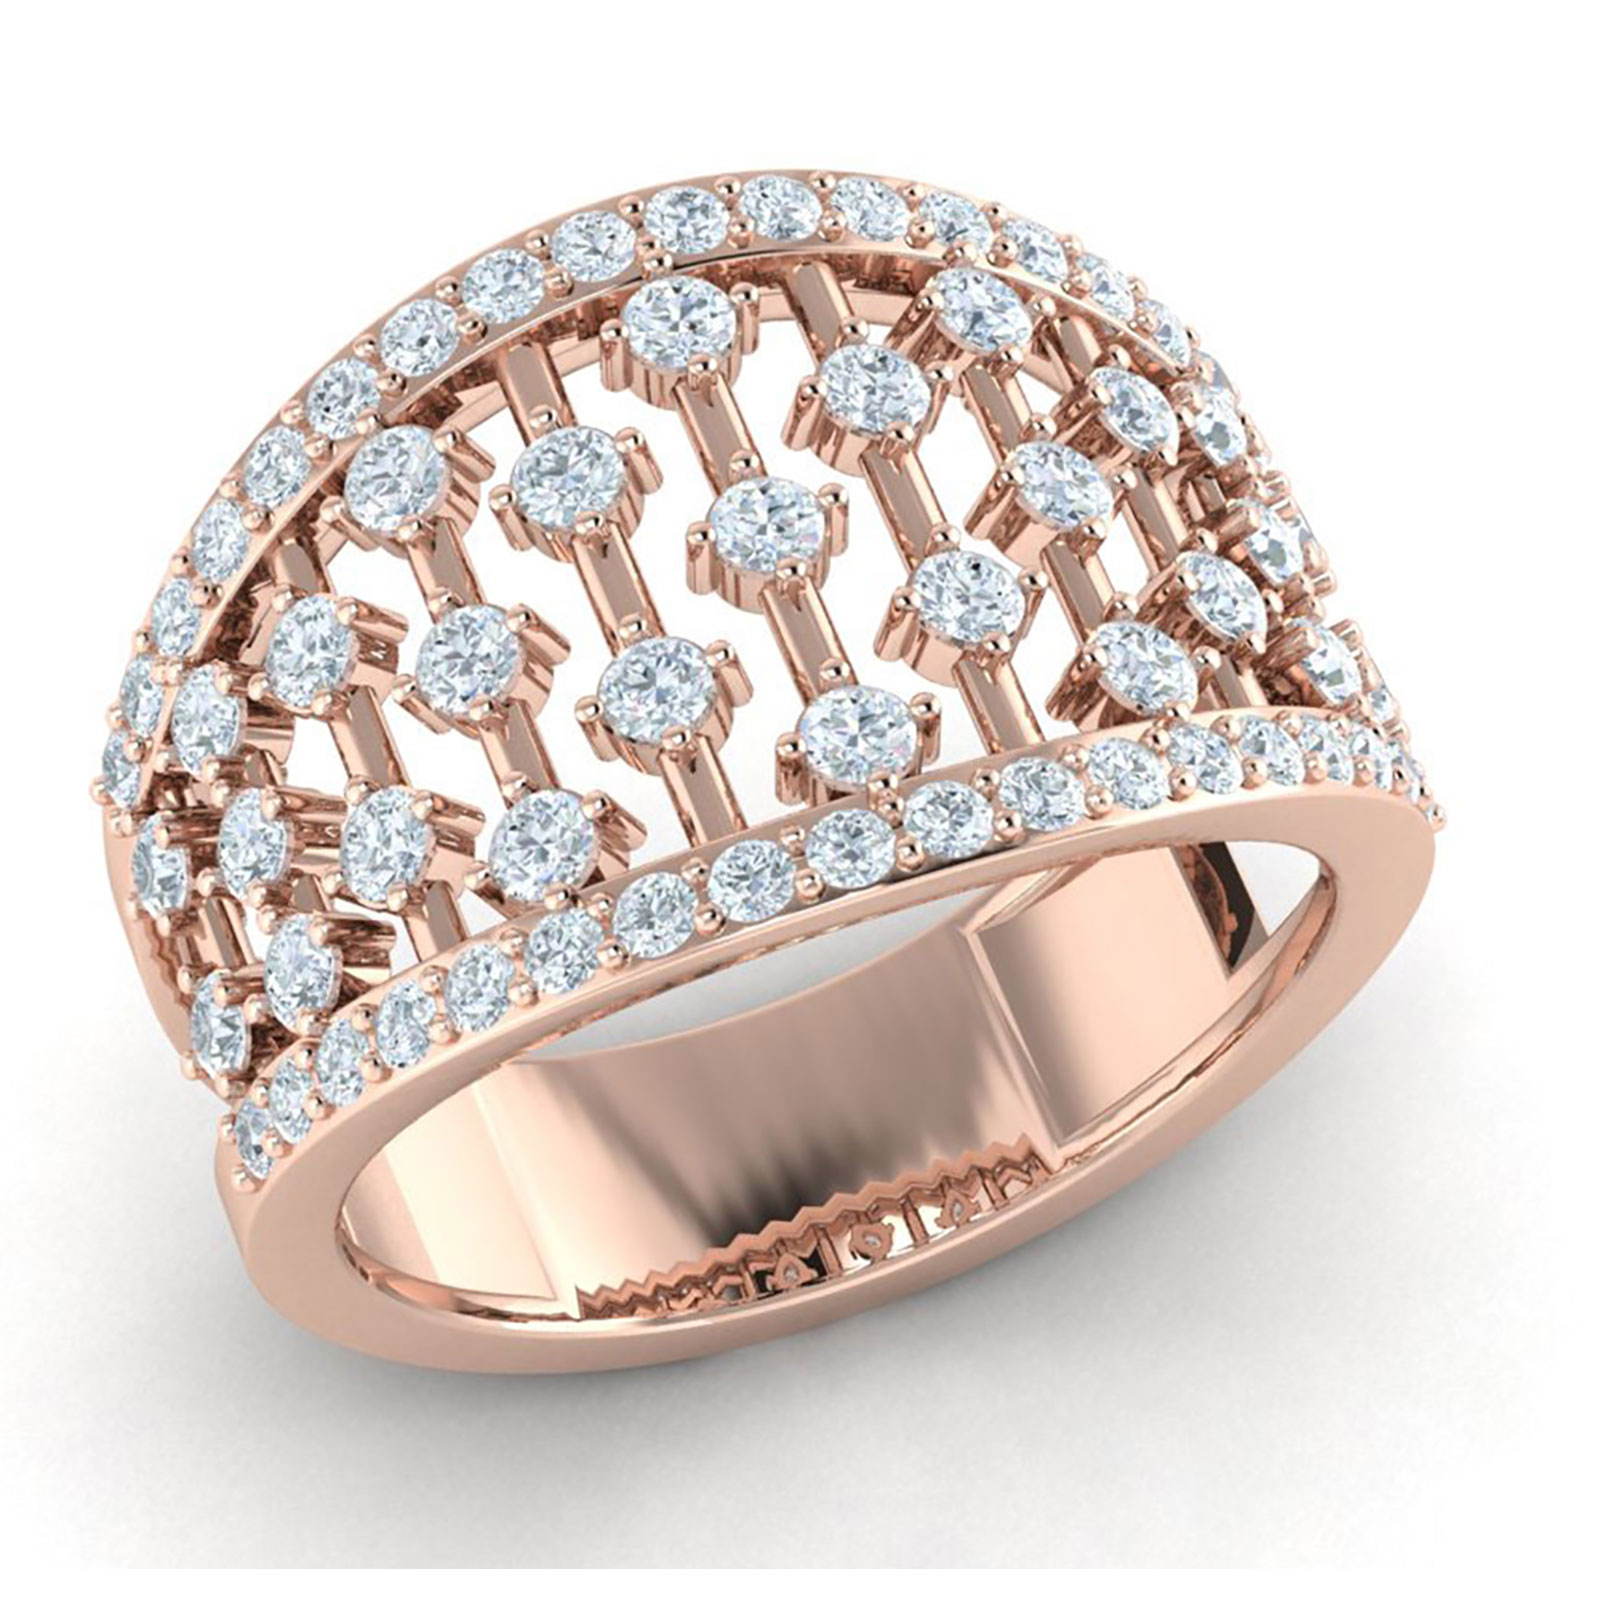 Jewel We Sell 2carat Round Cut Diamond Bridal Modern Engagement Fancy Ring Anniversary Band 10K Rose Gold GH SI1